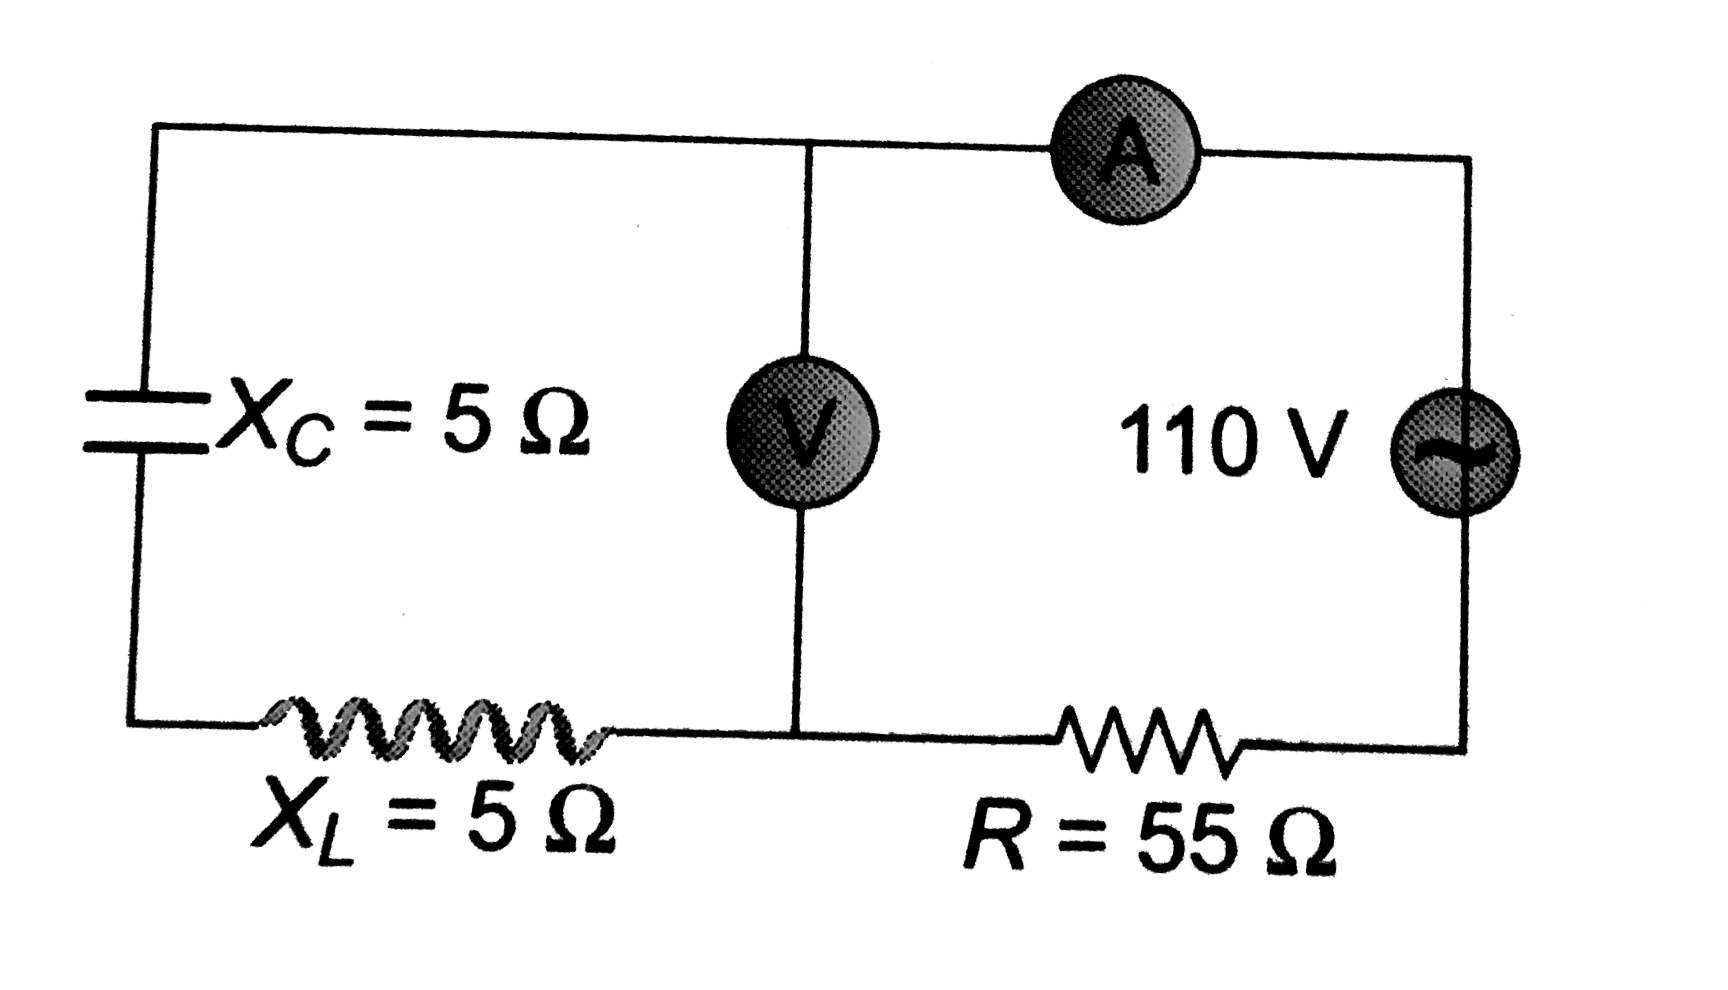 The reading of ammeter in the circuit shown will be